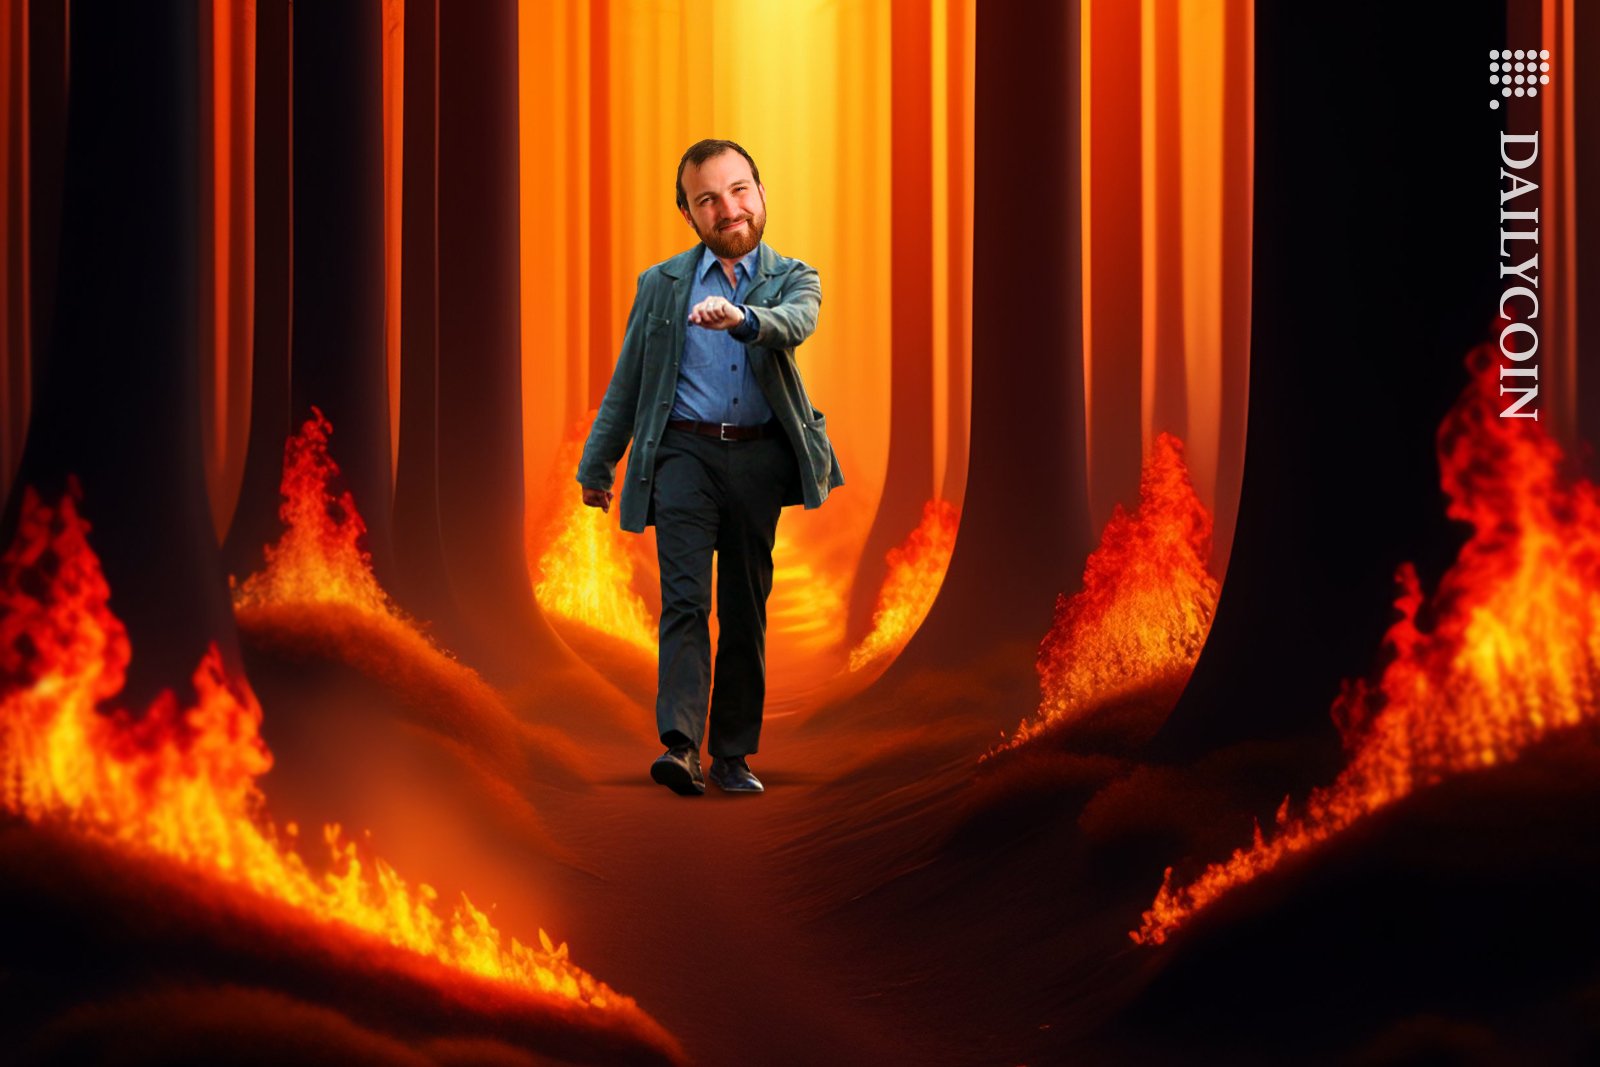 Charles Hoskinson walking out the fire woods looking all smug.